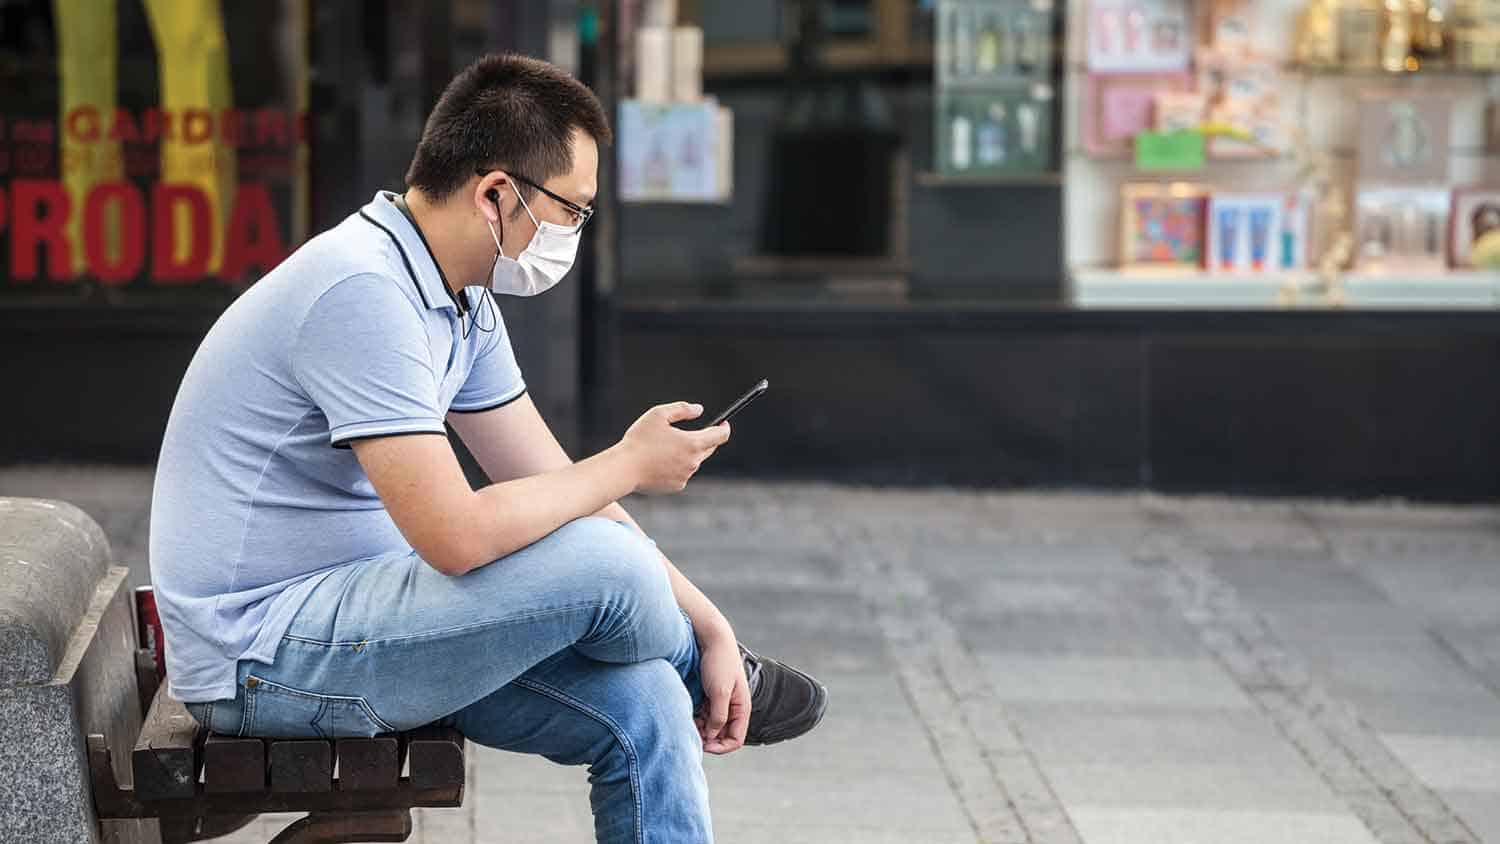 Man sat down wearing a mask and using a mobile phone